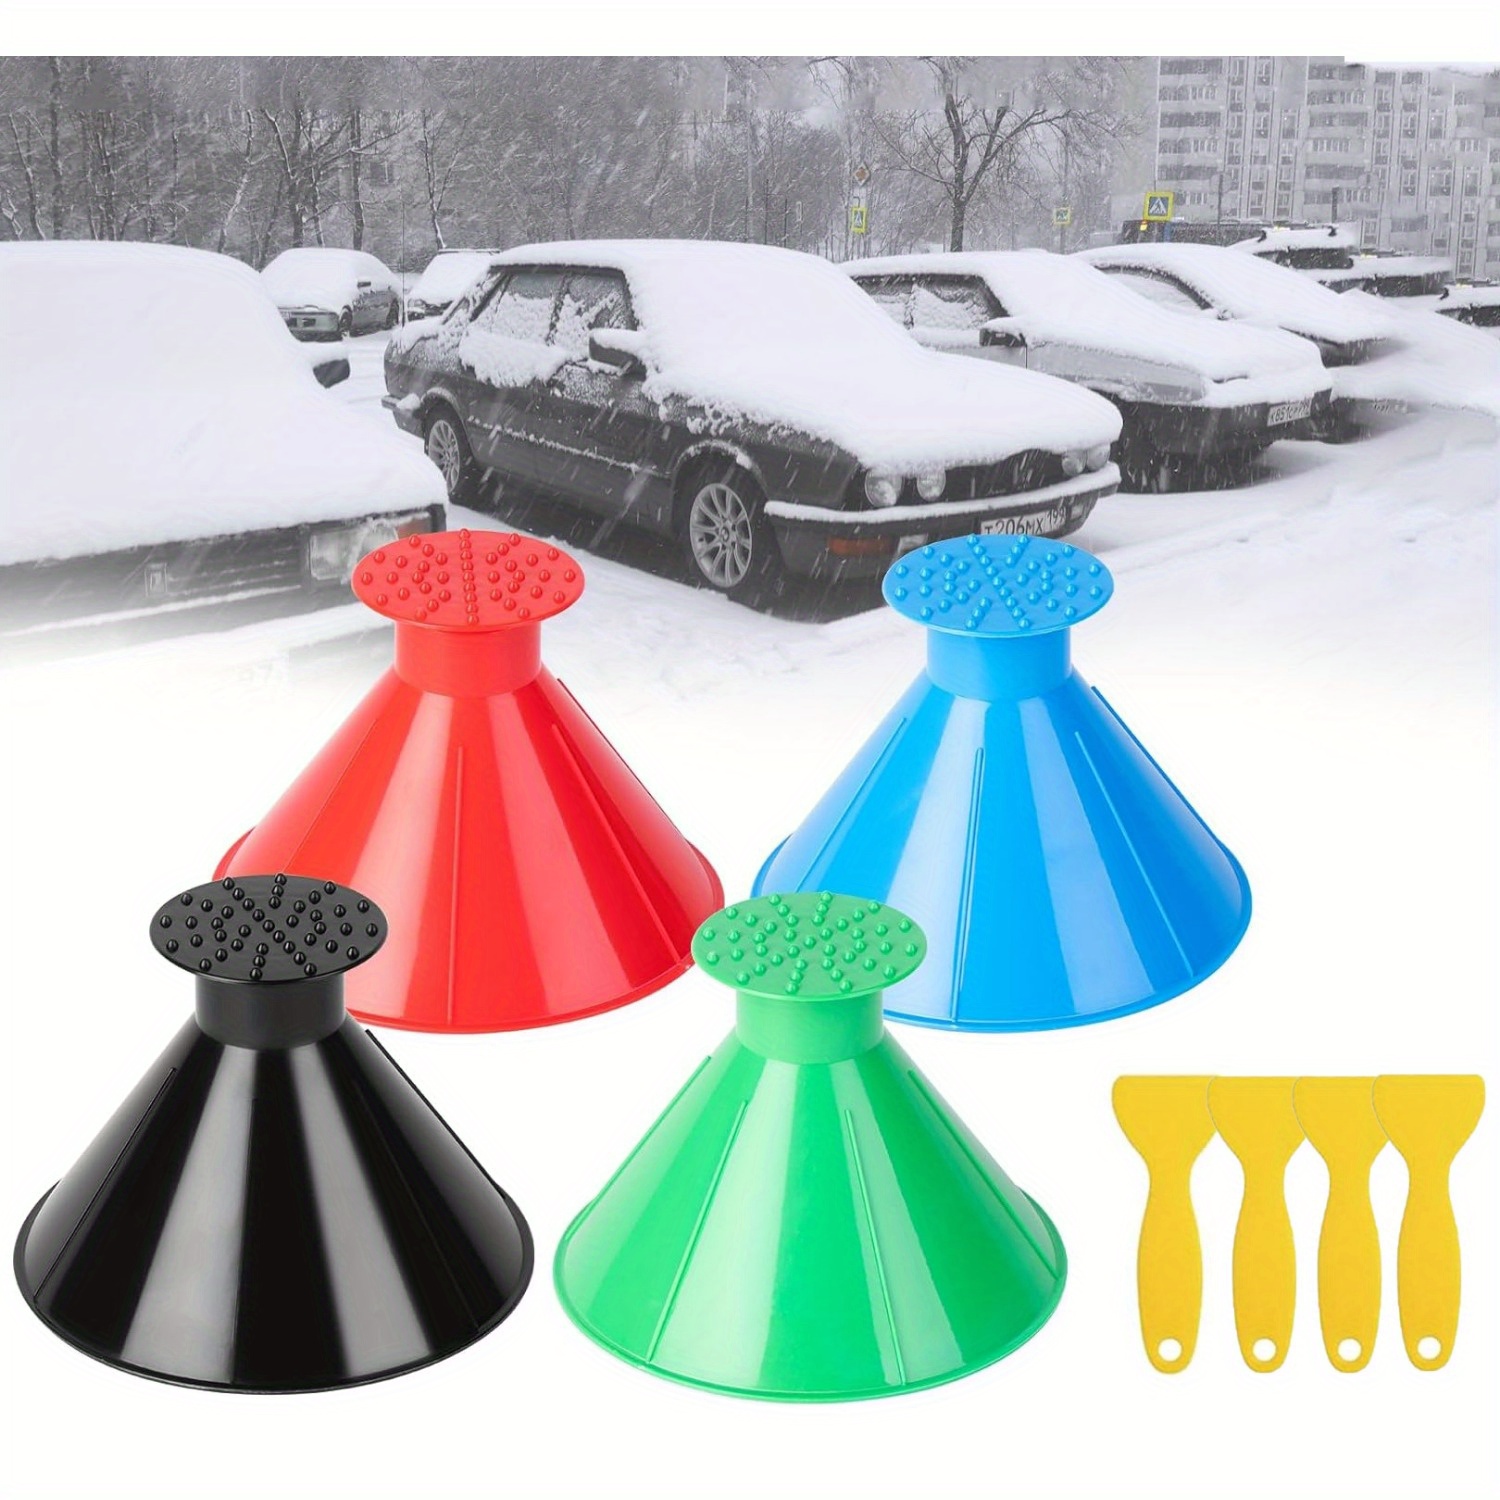 Magical Ice Scrapers for Car Windshield - 2 Pack Cone Magic Car Ice Scraper  with Funnel, Round Snow Scraper Blue Deicer Snow Removal Tool for Bus